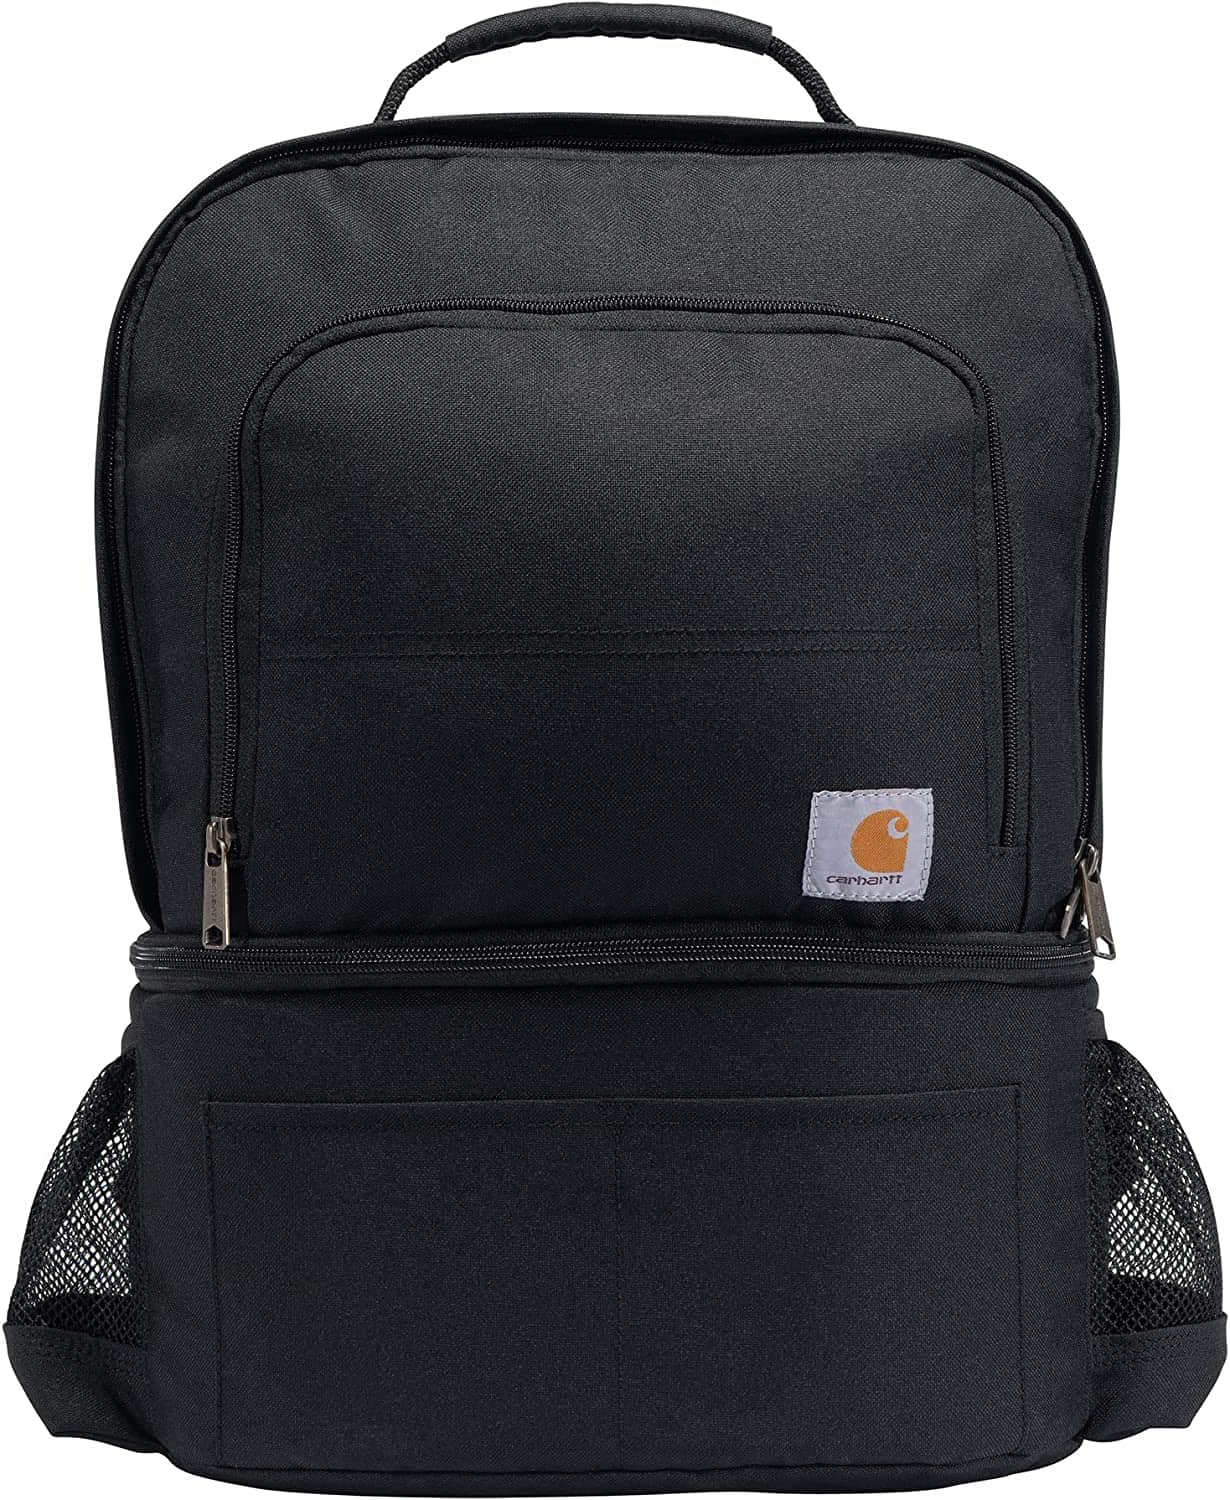 Carhartt Insulated 24-Can 2 Compartment Cooler Backpack